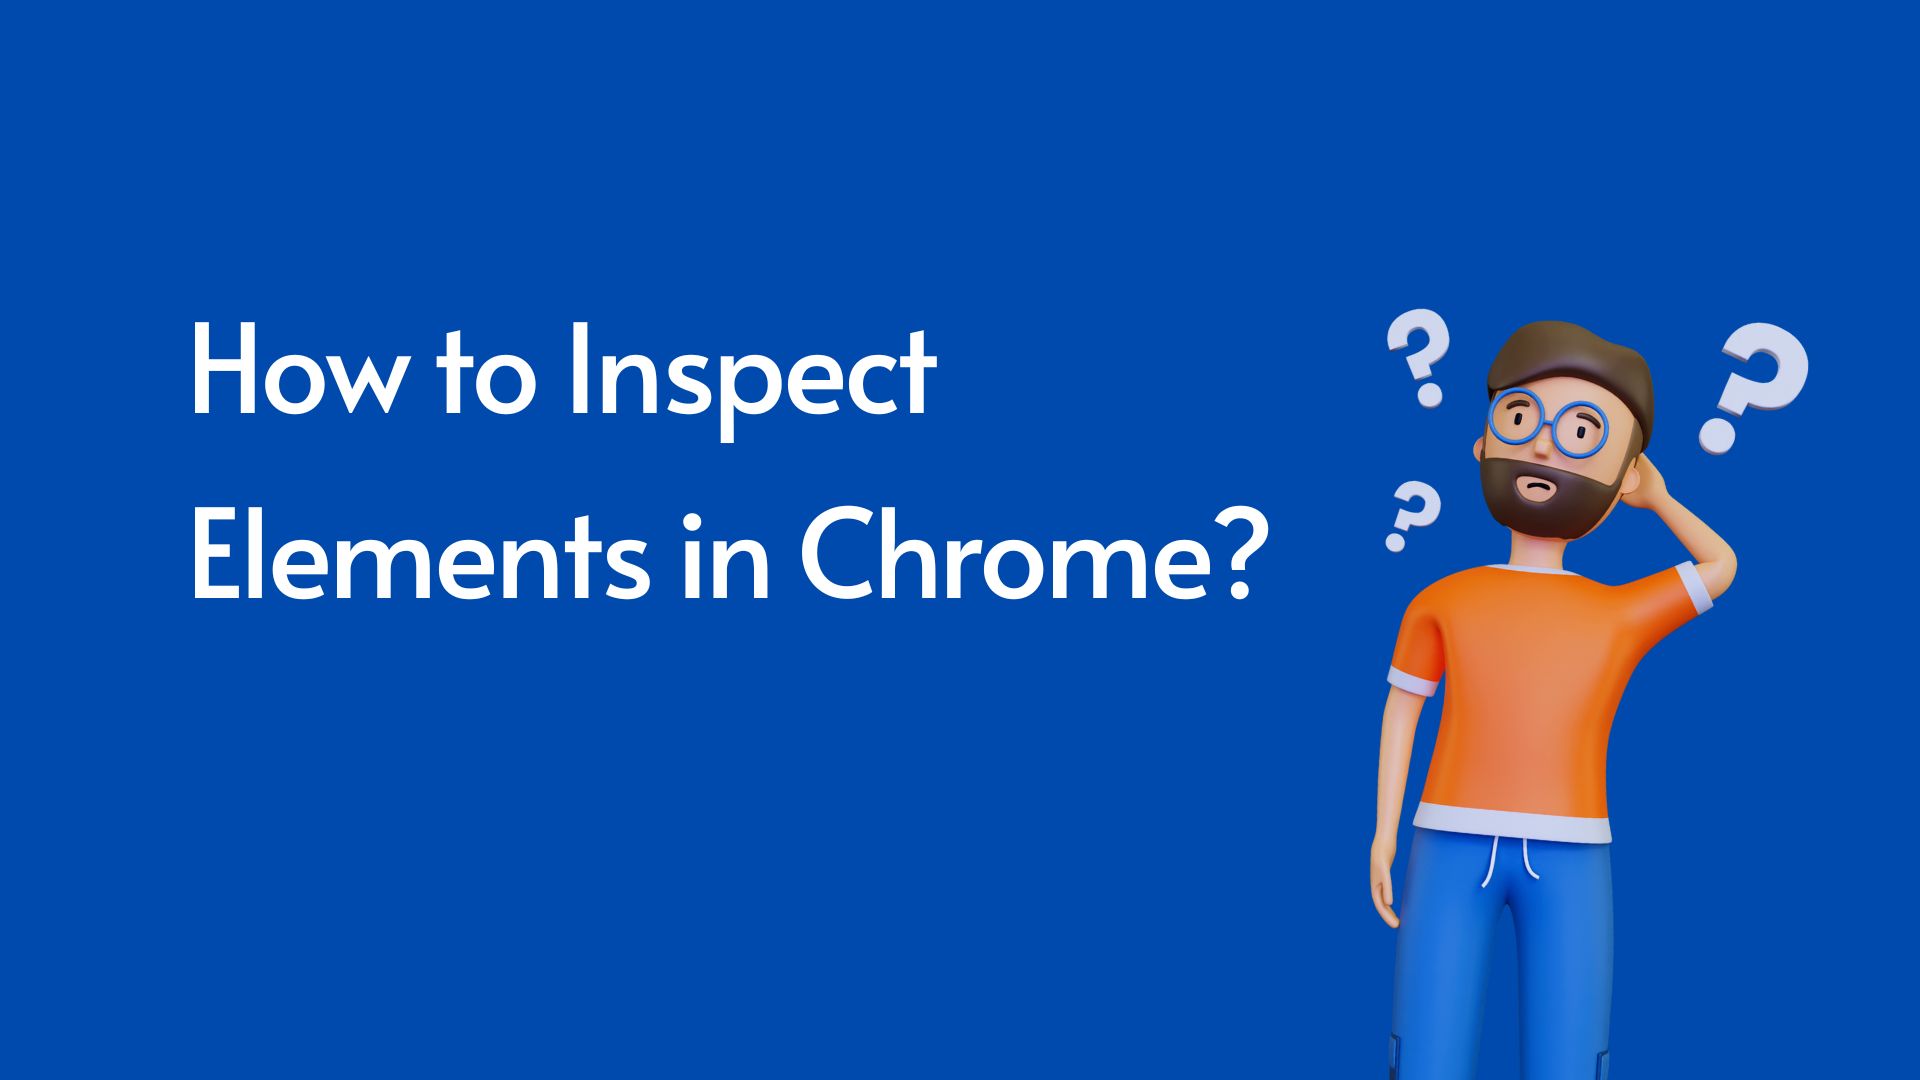 How to Inspect Elements in Chrome